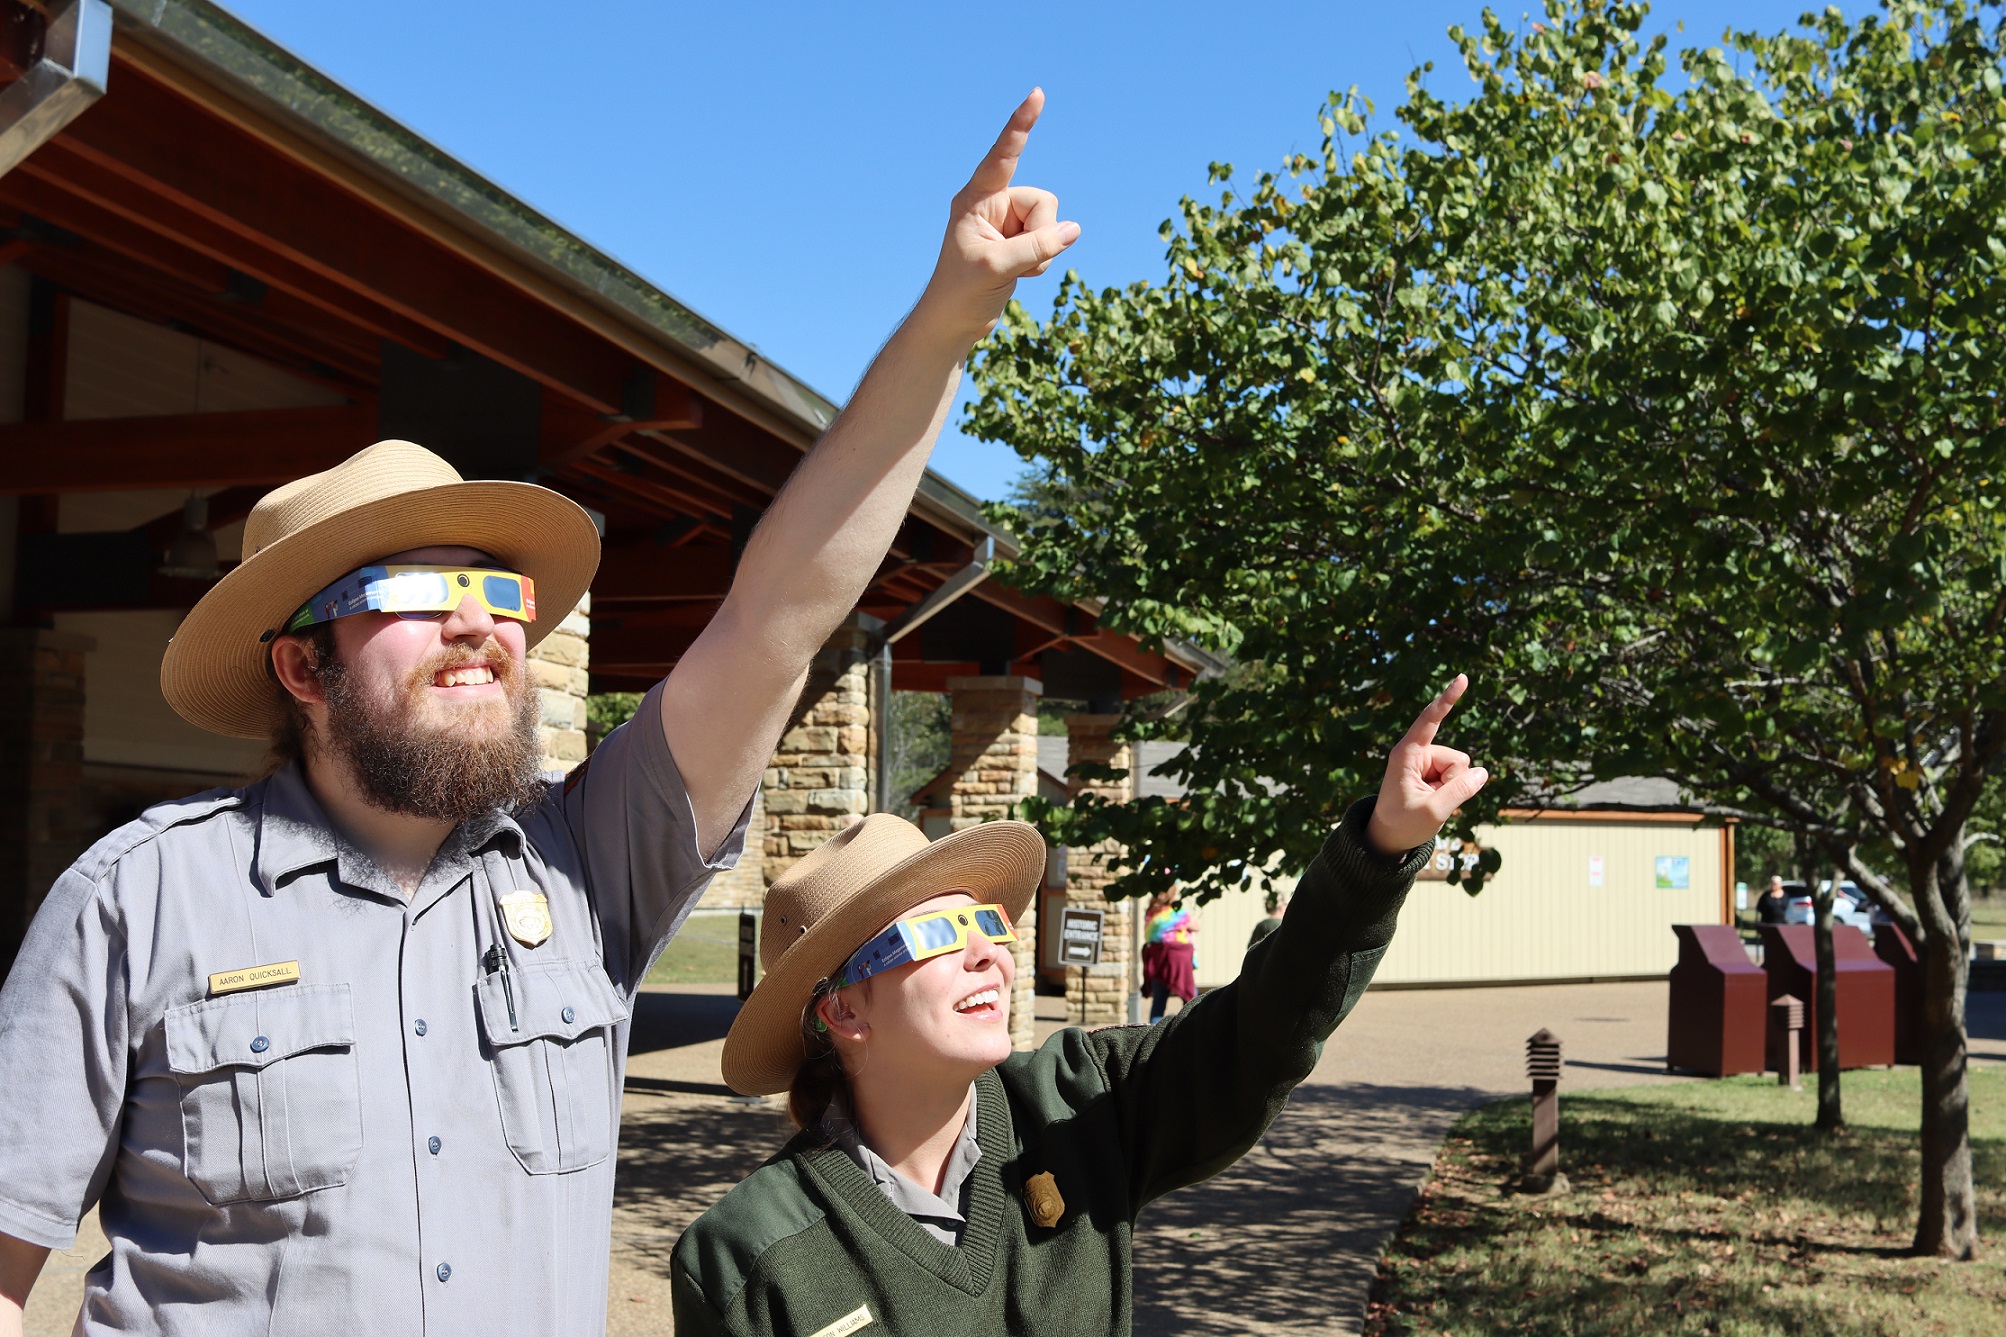 Two people wearing National Park Service uniforms and colorful dark lensed glasses point toward a sunny sky.